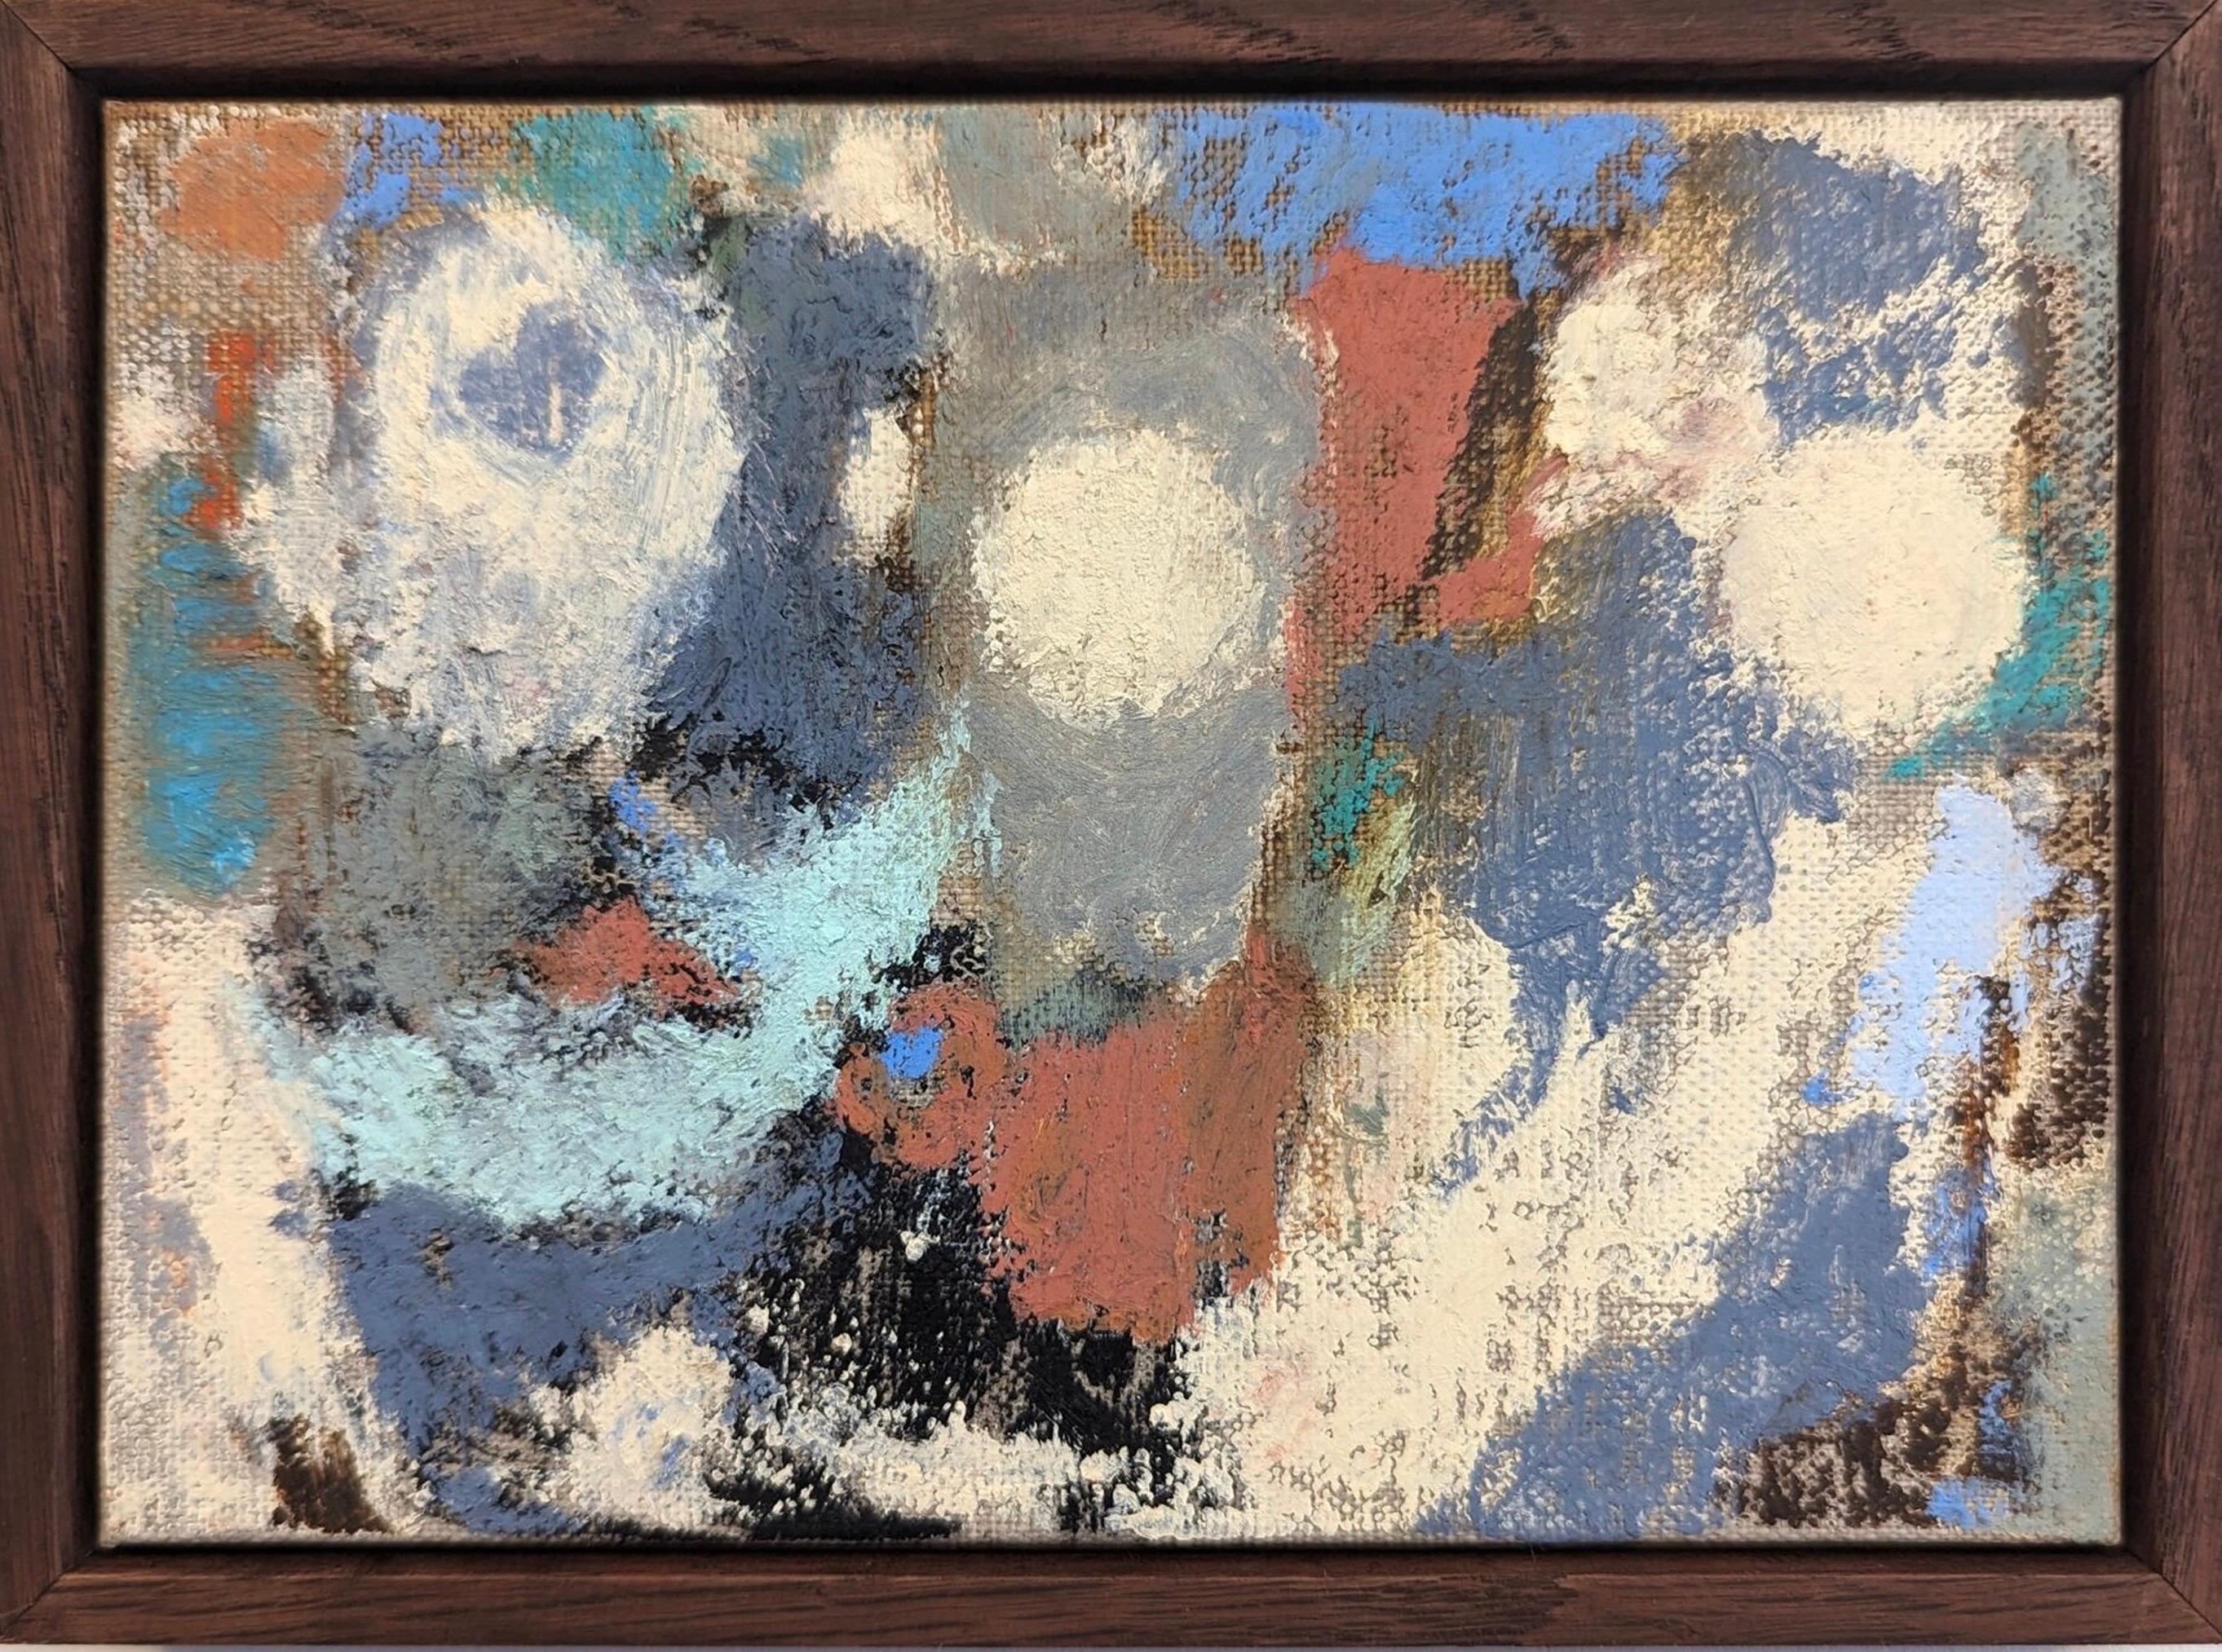 PILLAR AND MOTH
Size: 15 x 20 cm (including frame)
Oil on linen panel

A small but powerful abstract composition by contemporary British artist Lloyd Durling, painted in oil onto linen panel. Signed, titled and dated on reverse.

Central to this